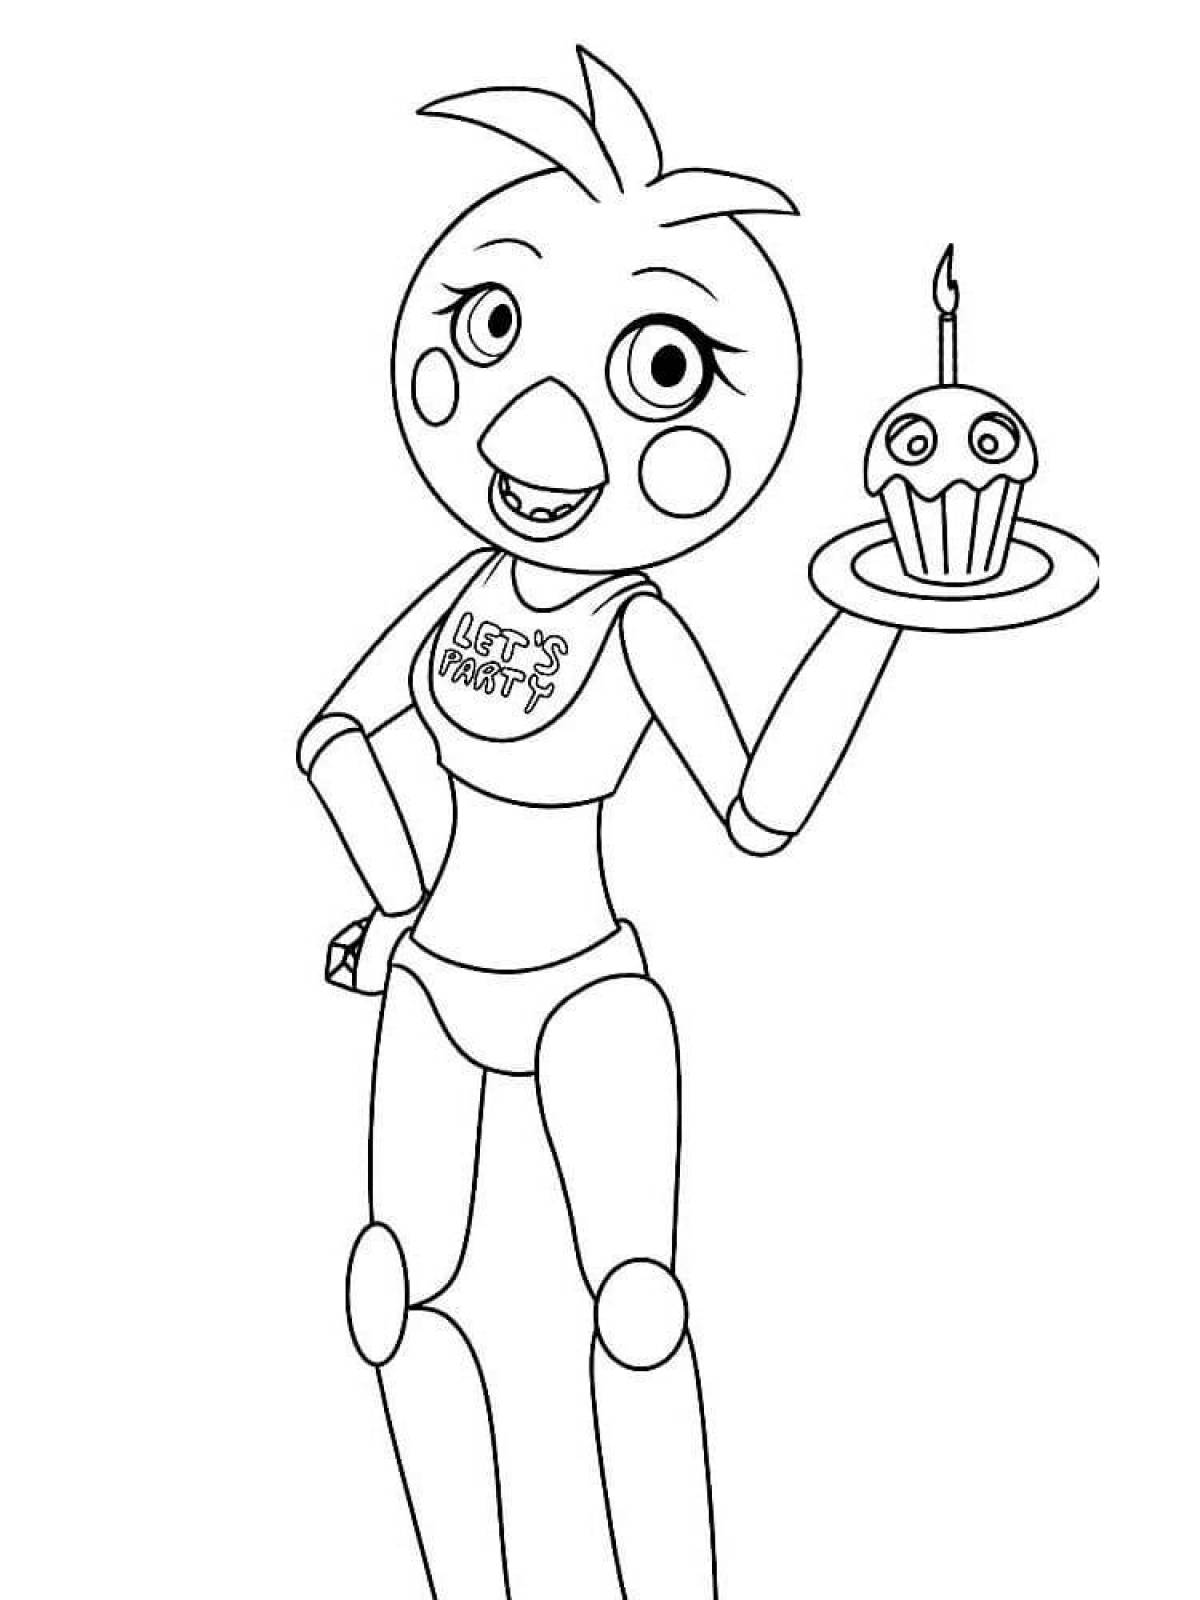 Coloring pages of animatronics for kids